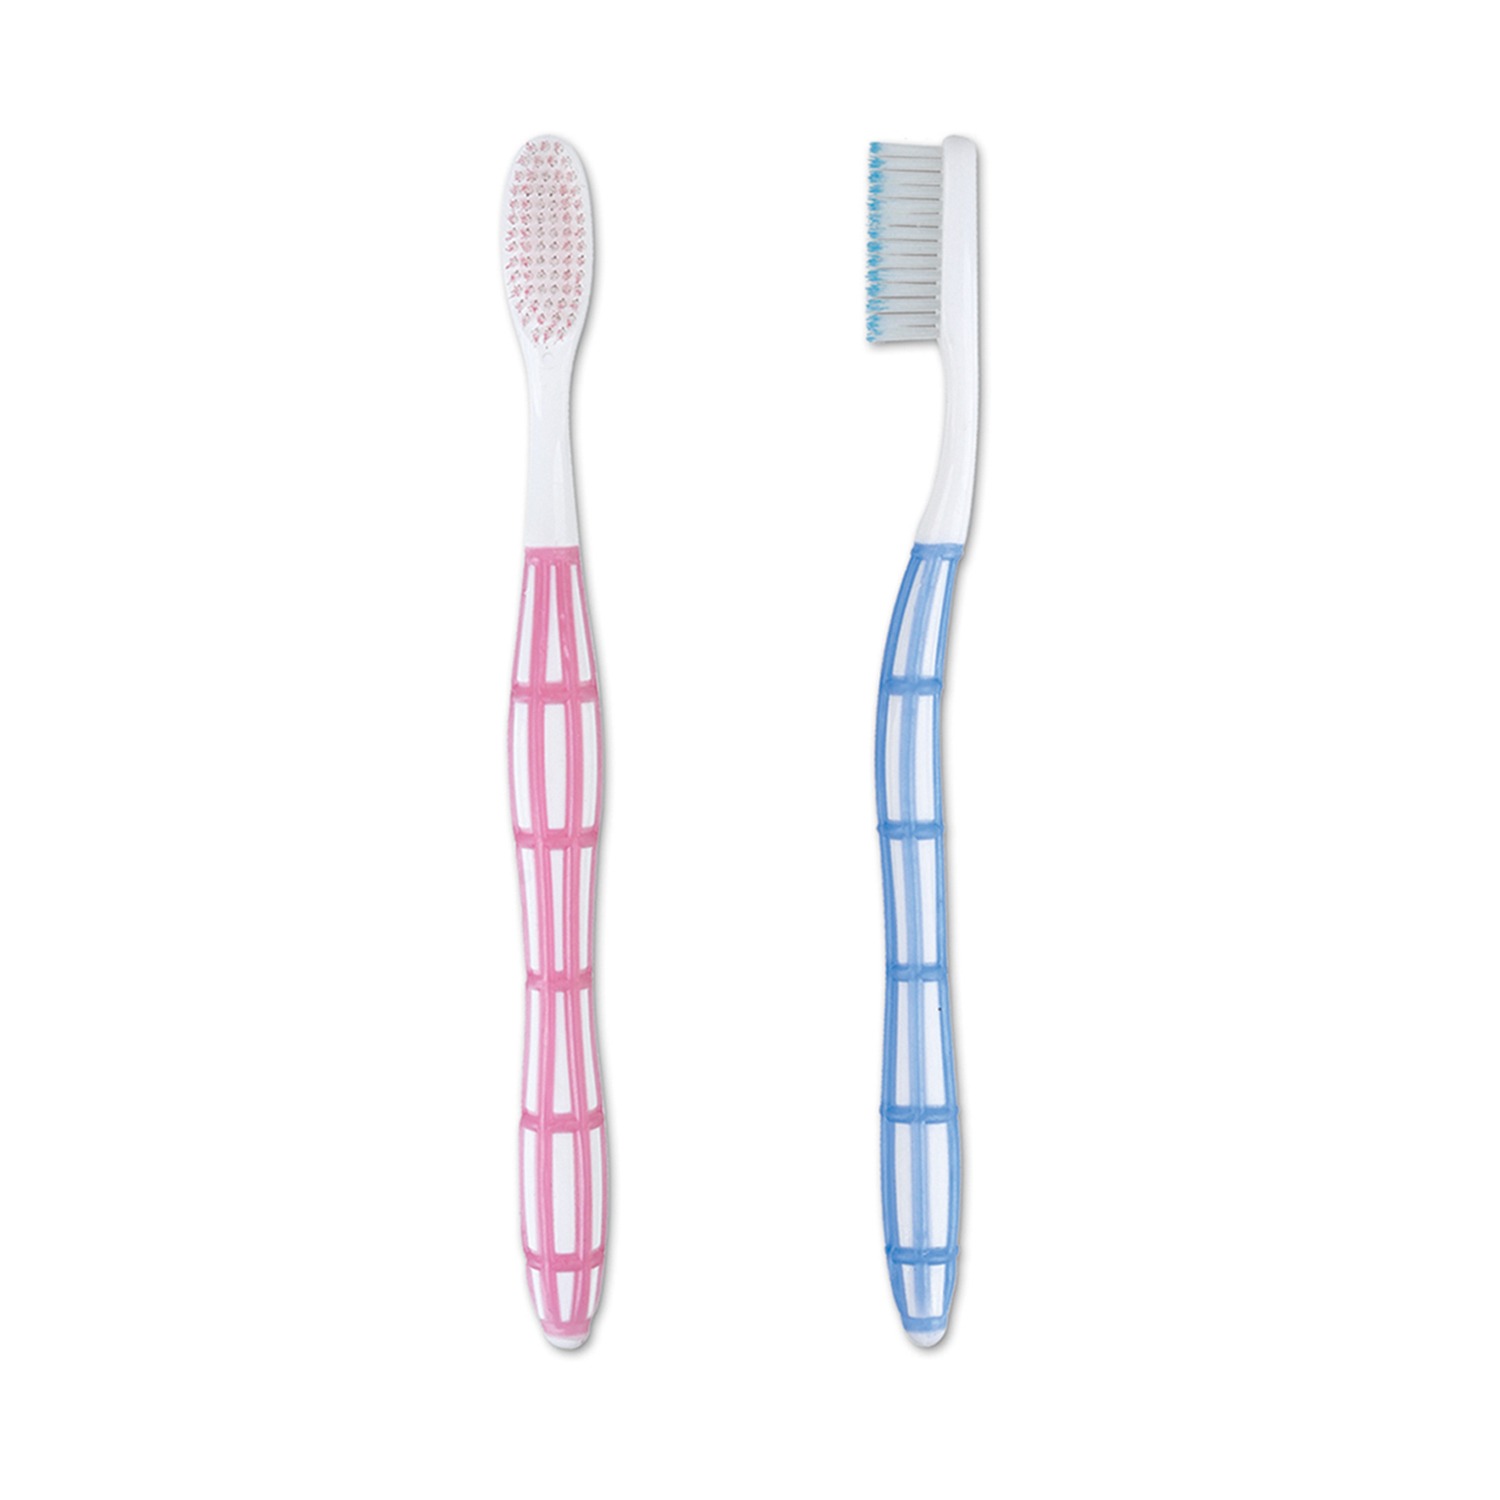 Adult toothbrush 864